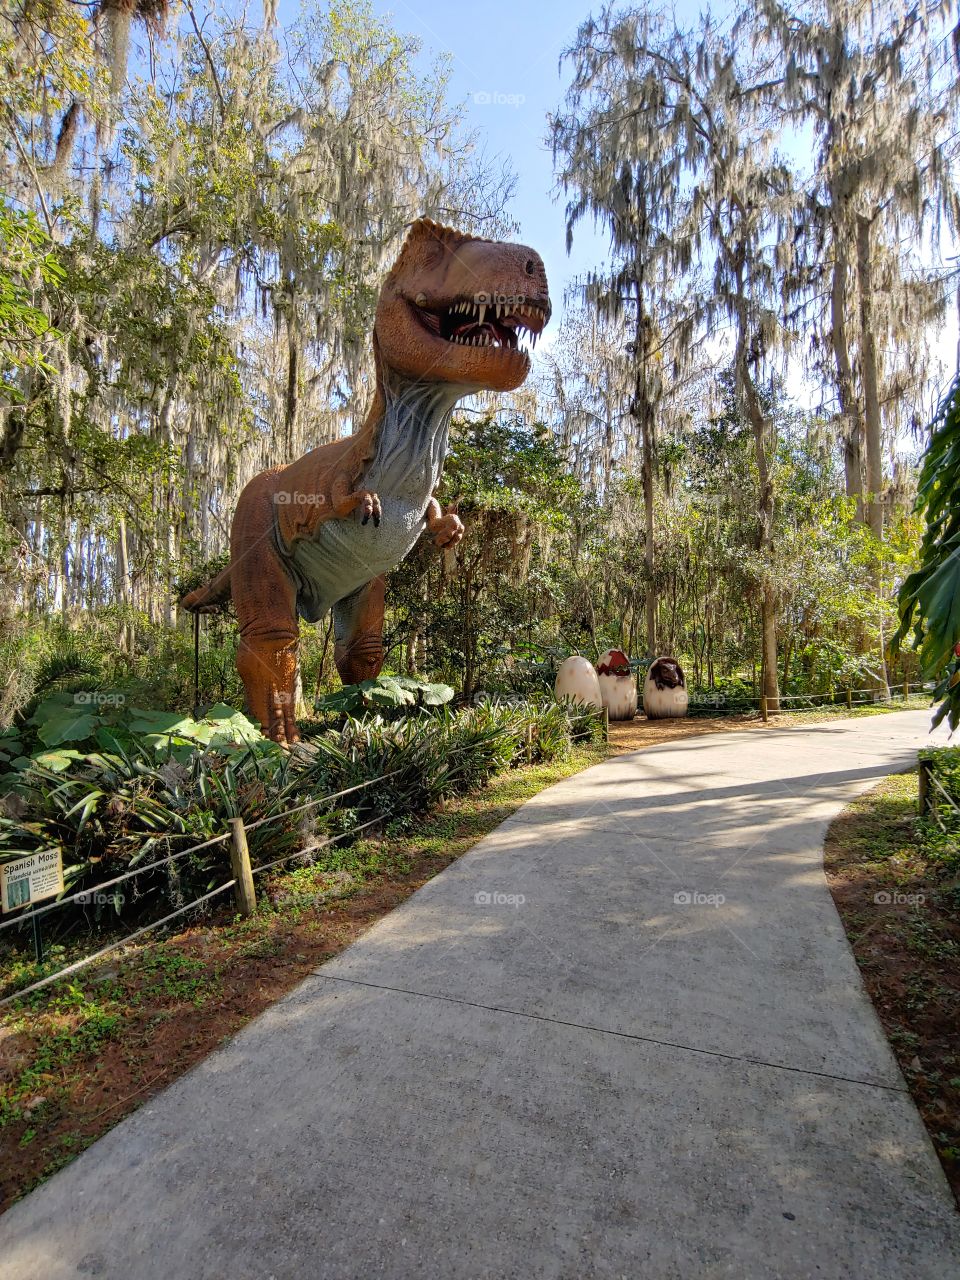 giant t-rex. okay.  dinosaur world was a blast. the whole family loved it. im really thinking of framing this and adding it to my sons room.